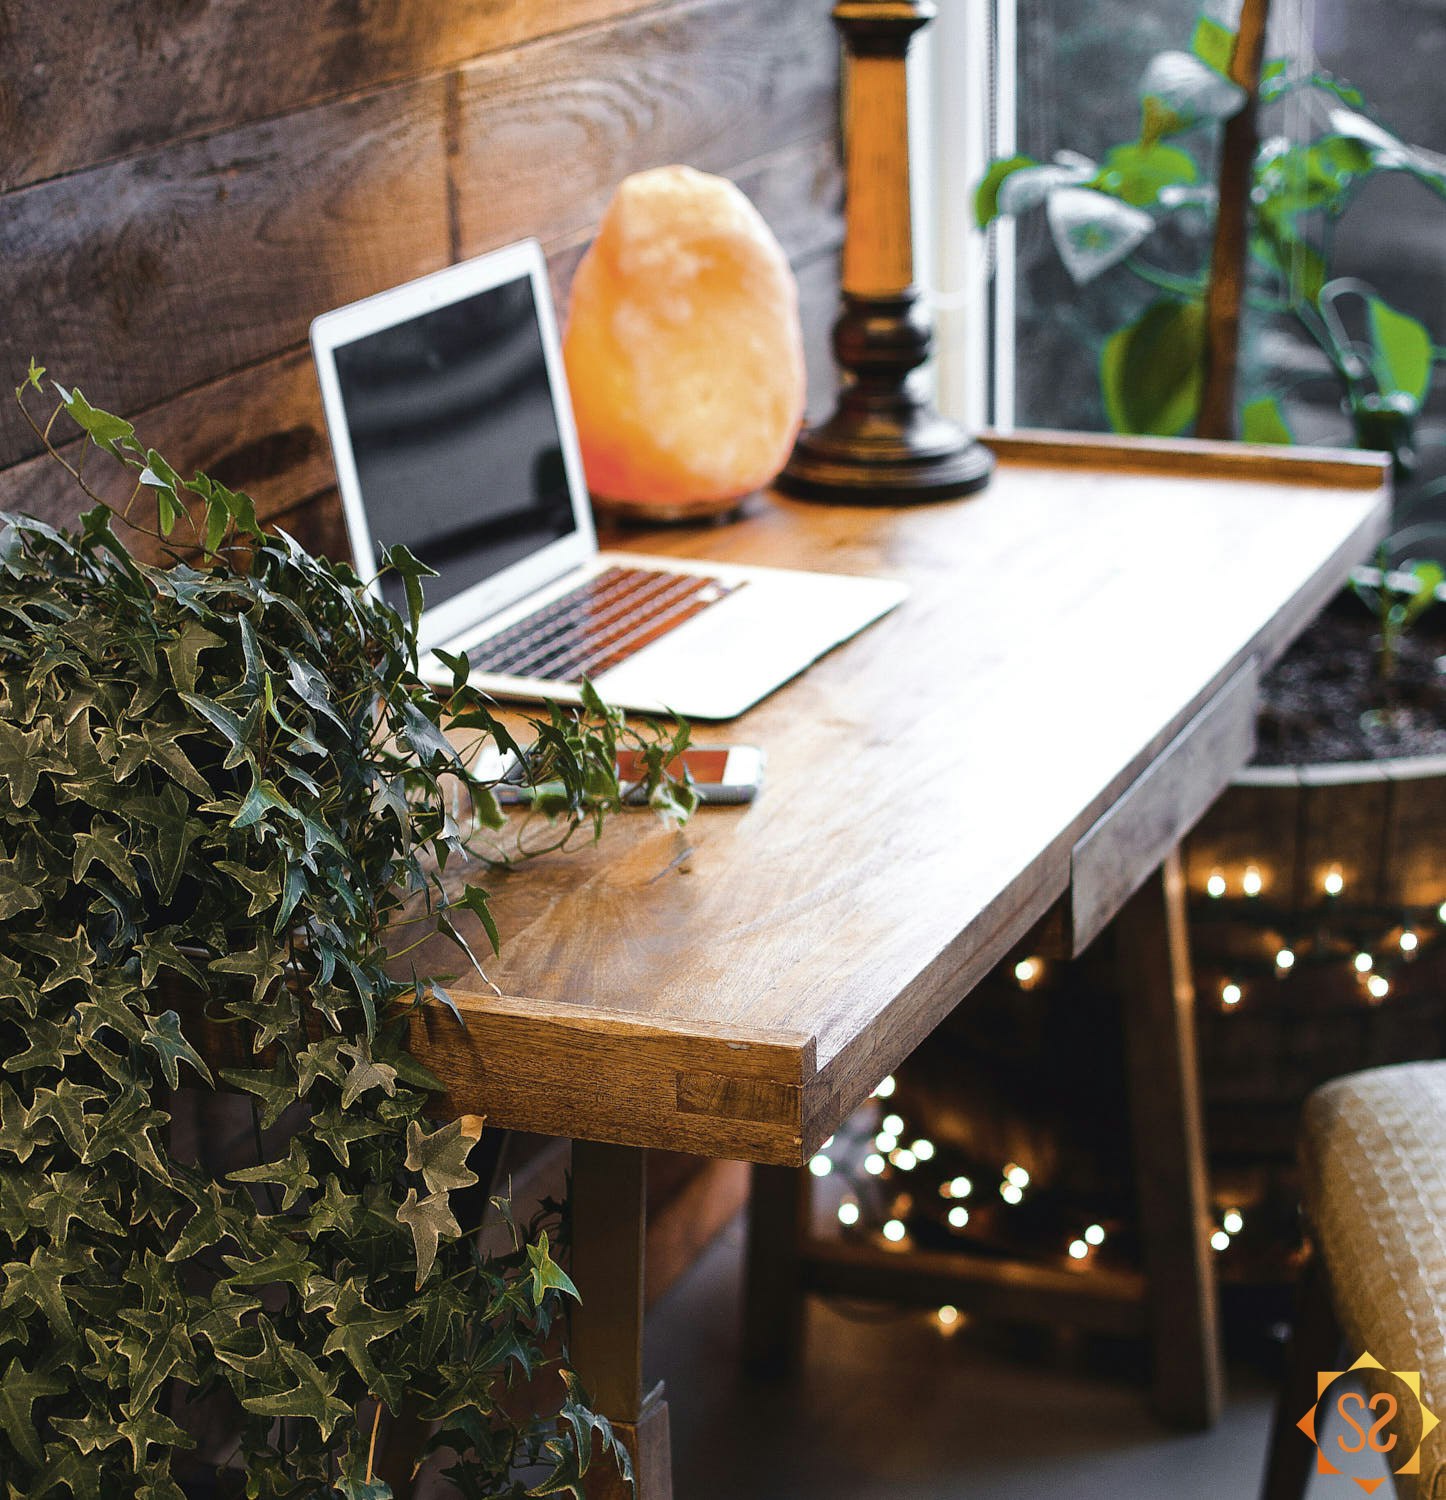 A desk in a home office with a laptop, plant, and light.